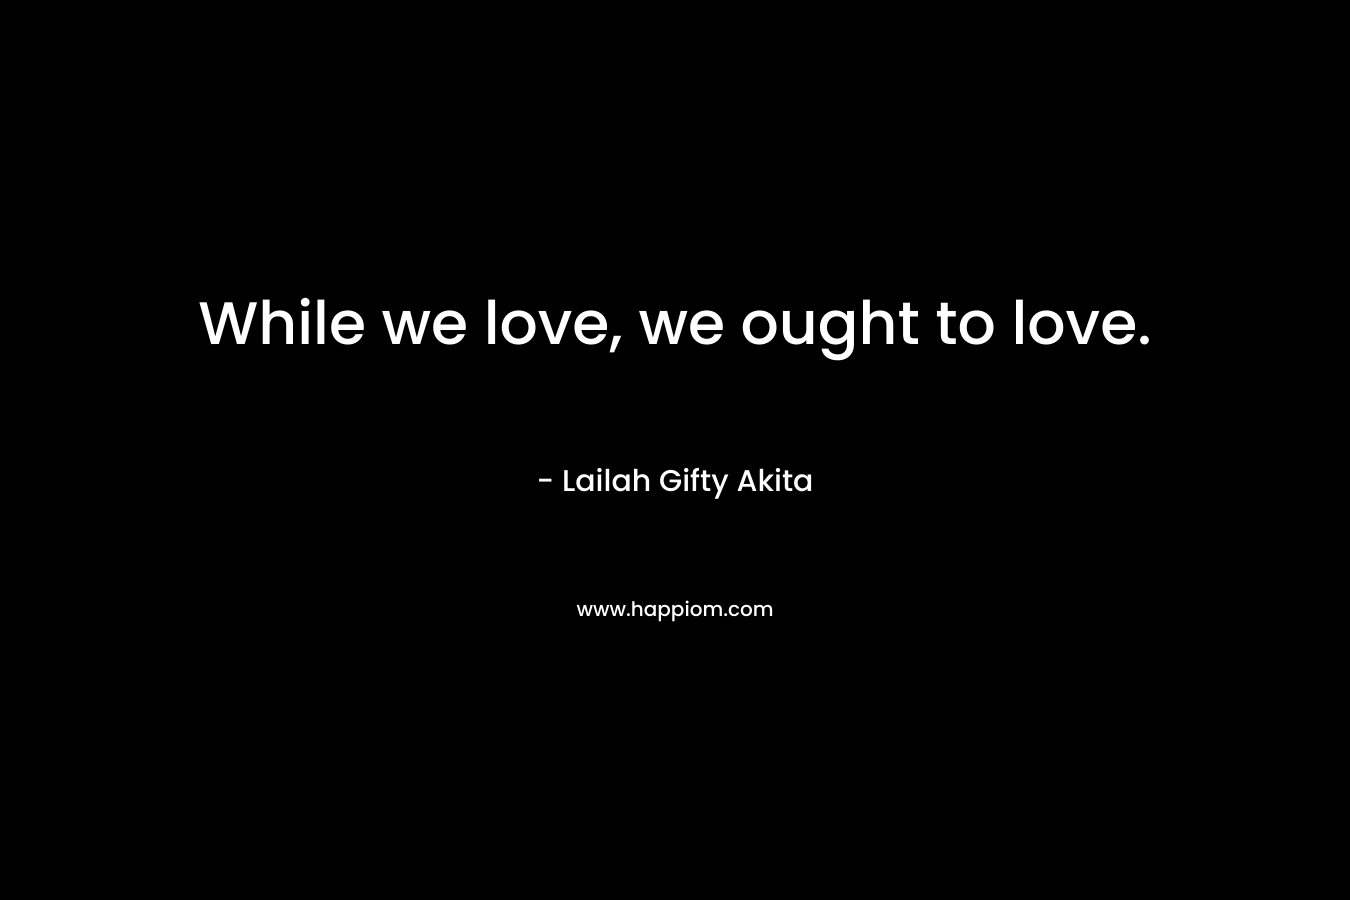 While we love, we ought to love.